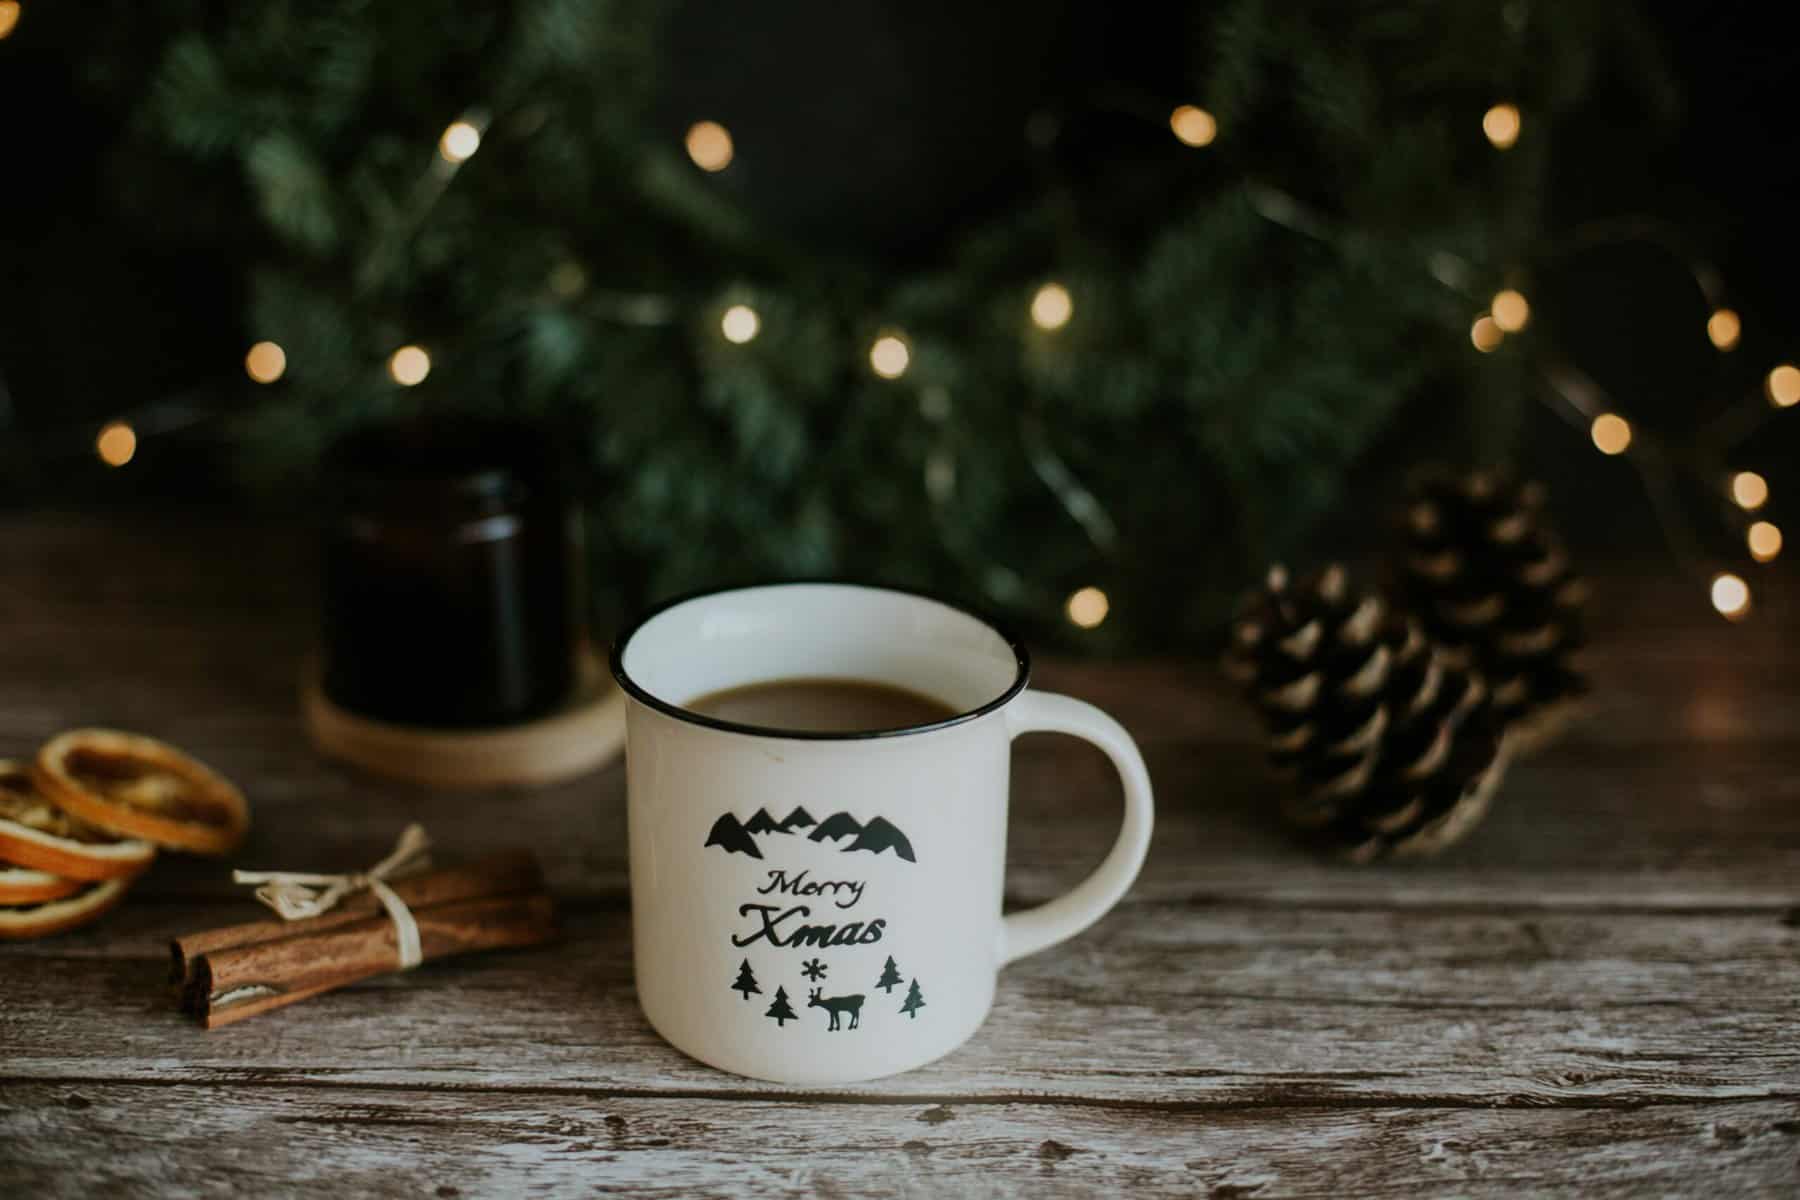 Cup of tea at Christmas in front of tree